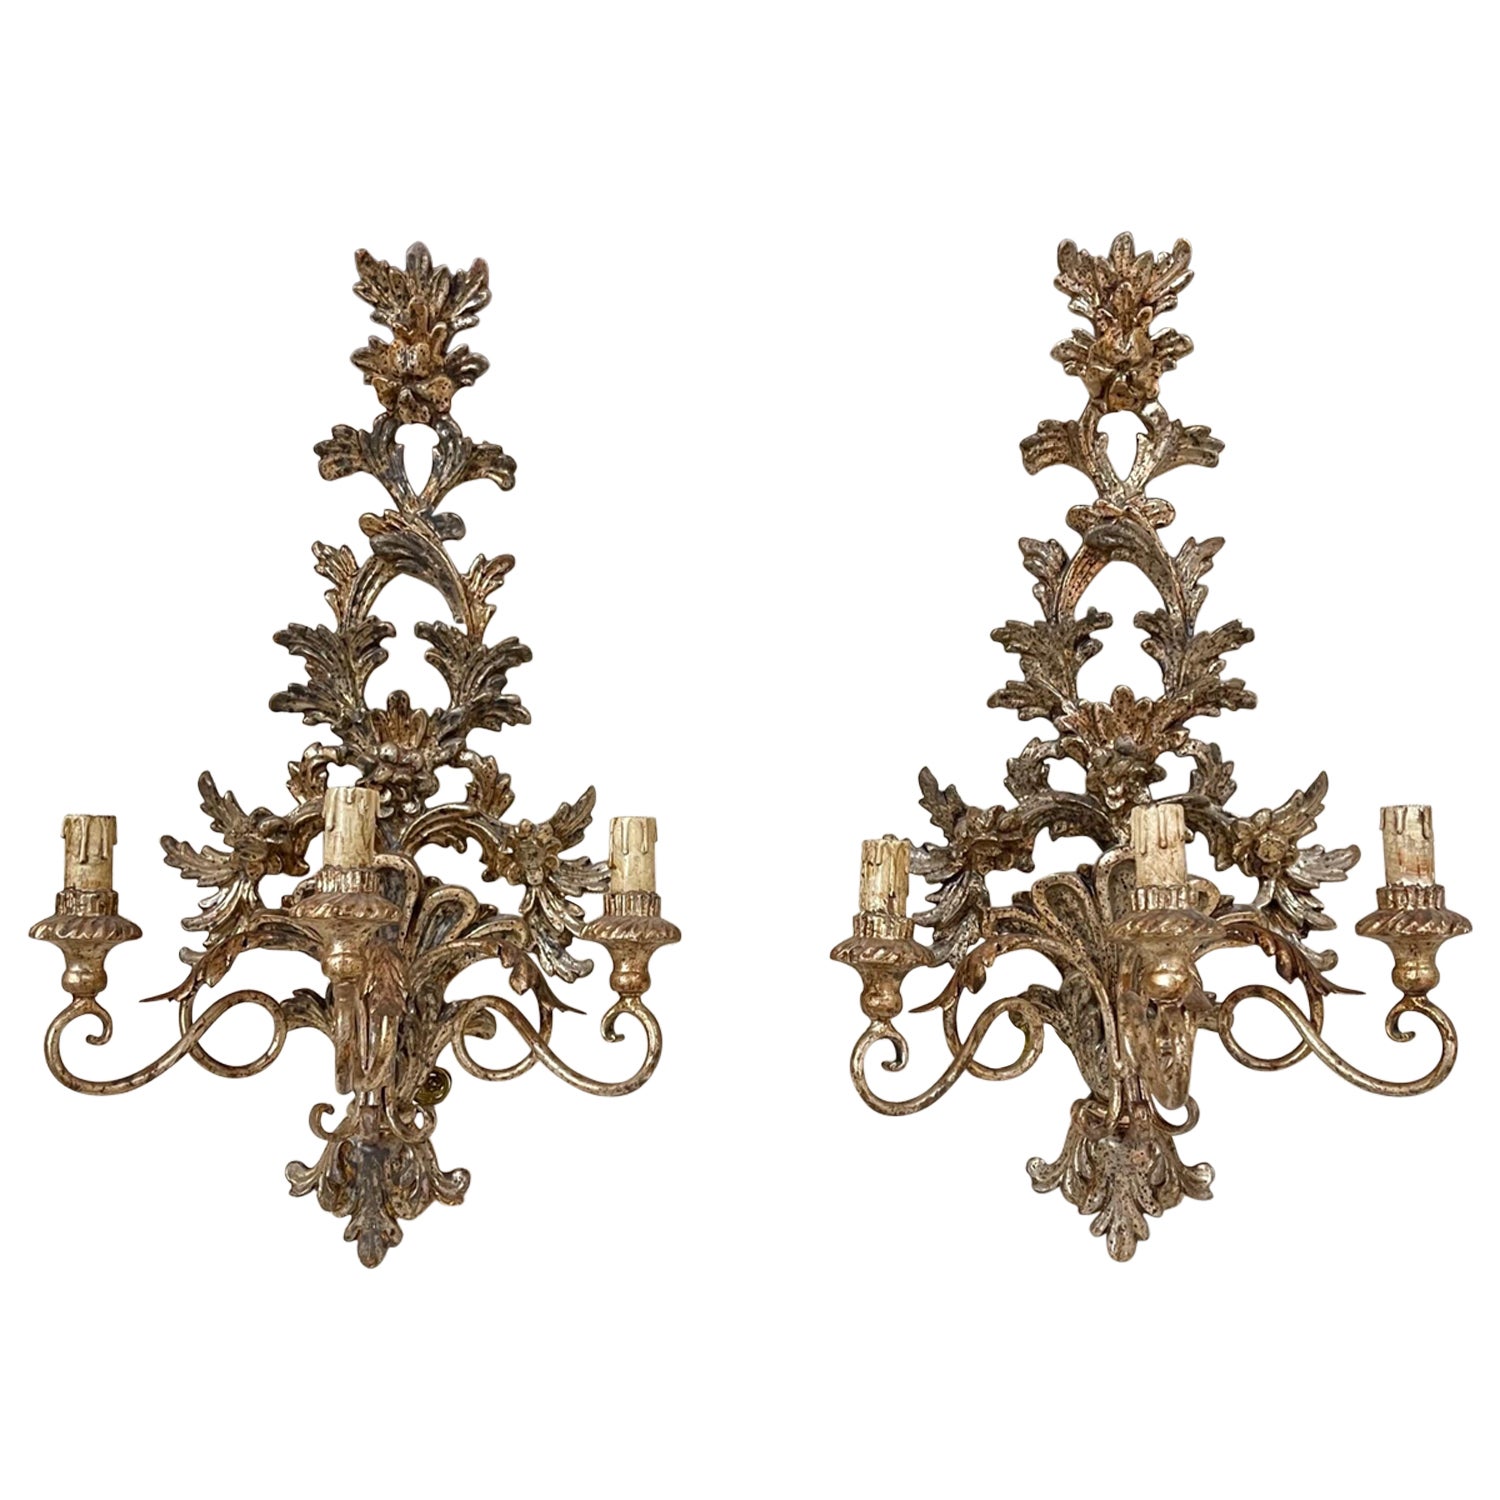 Pair of Antique Italian Carved and Polychromed Wood 3 Arm Chandeliers For Sale